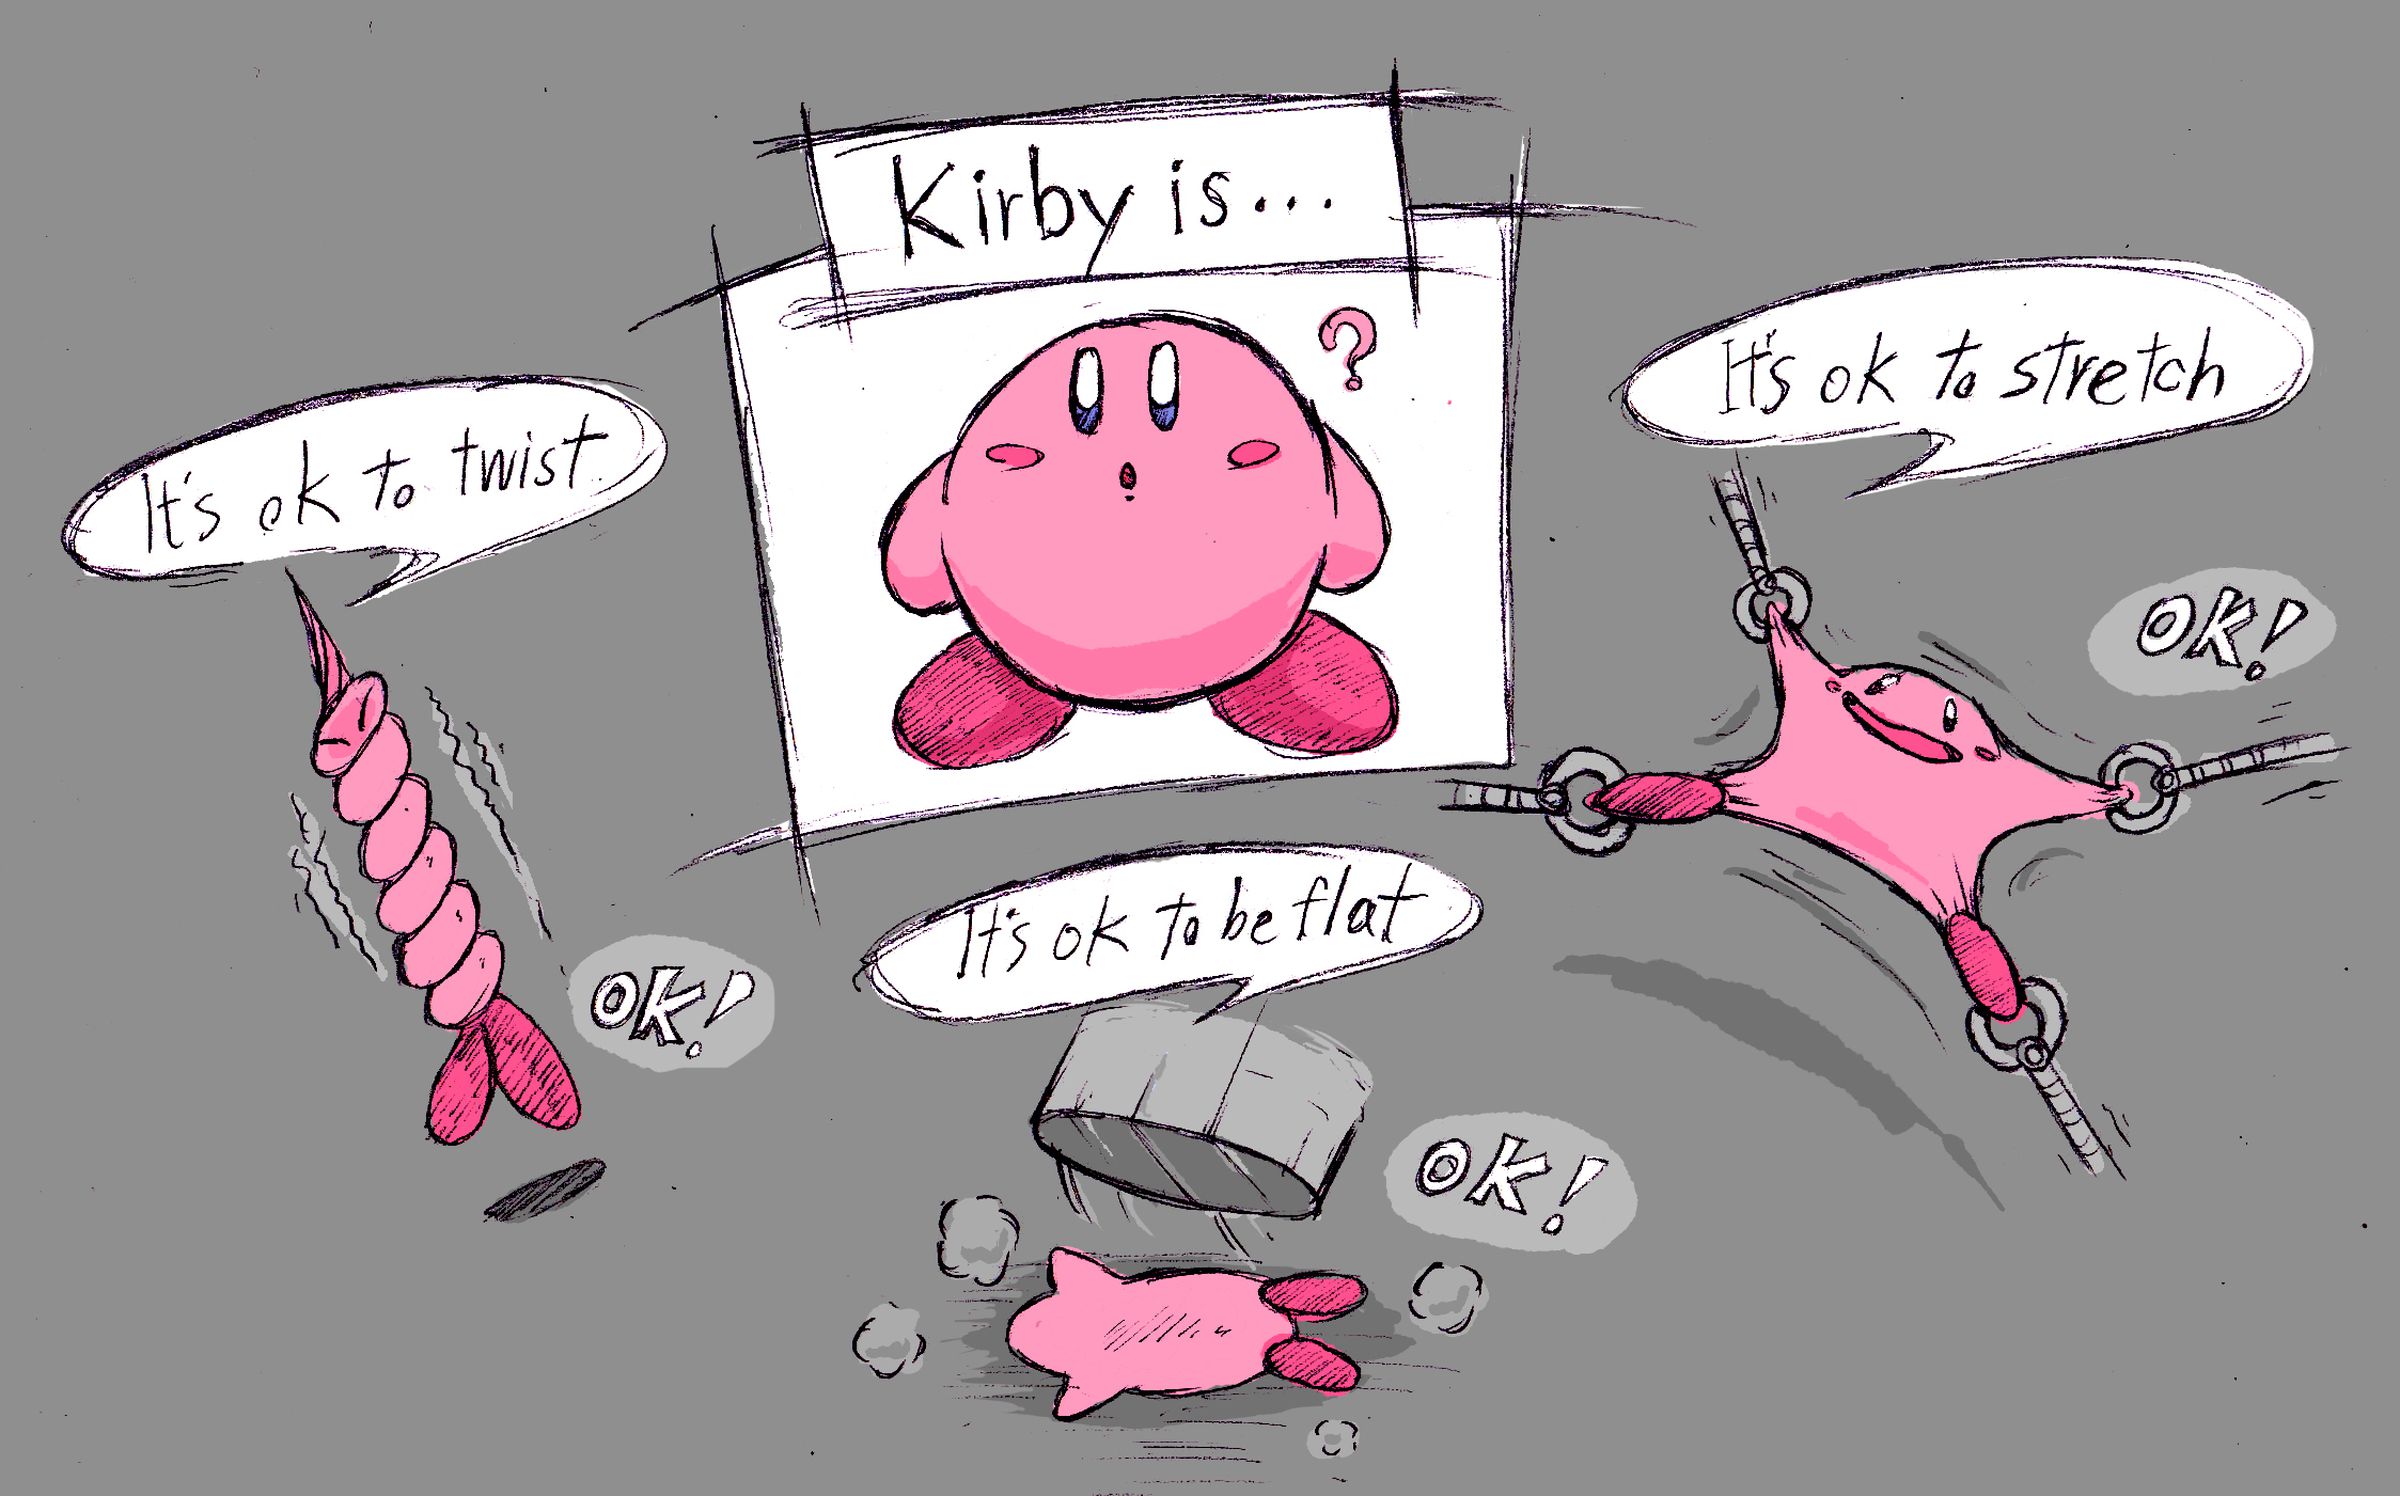 Illustration from “The Many Dimensions of Kirby” presentation at GDC 2023 featuring drawings of Kirby in many different configurations